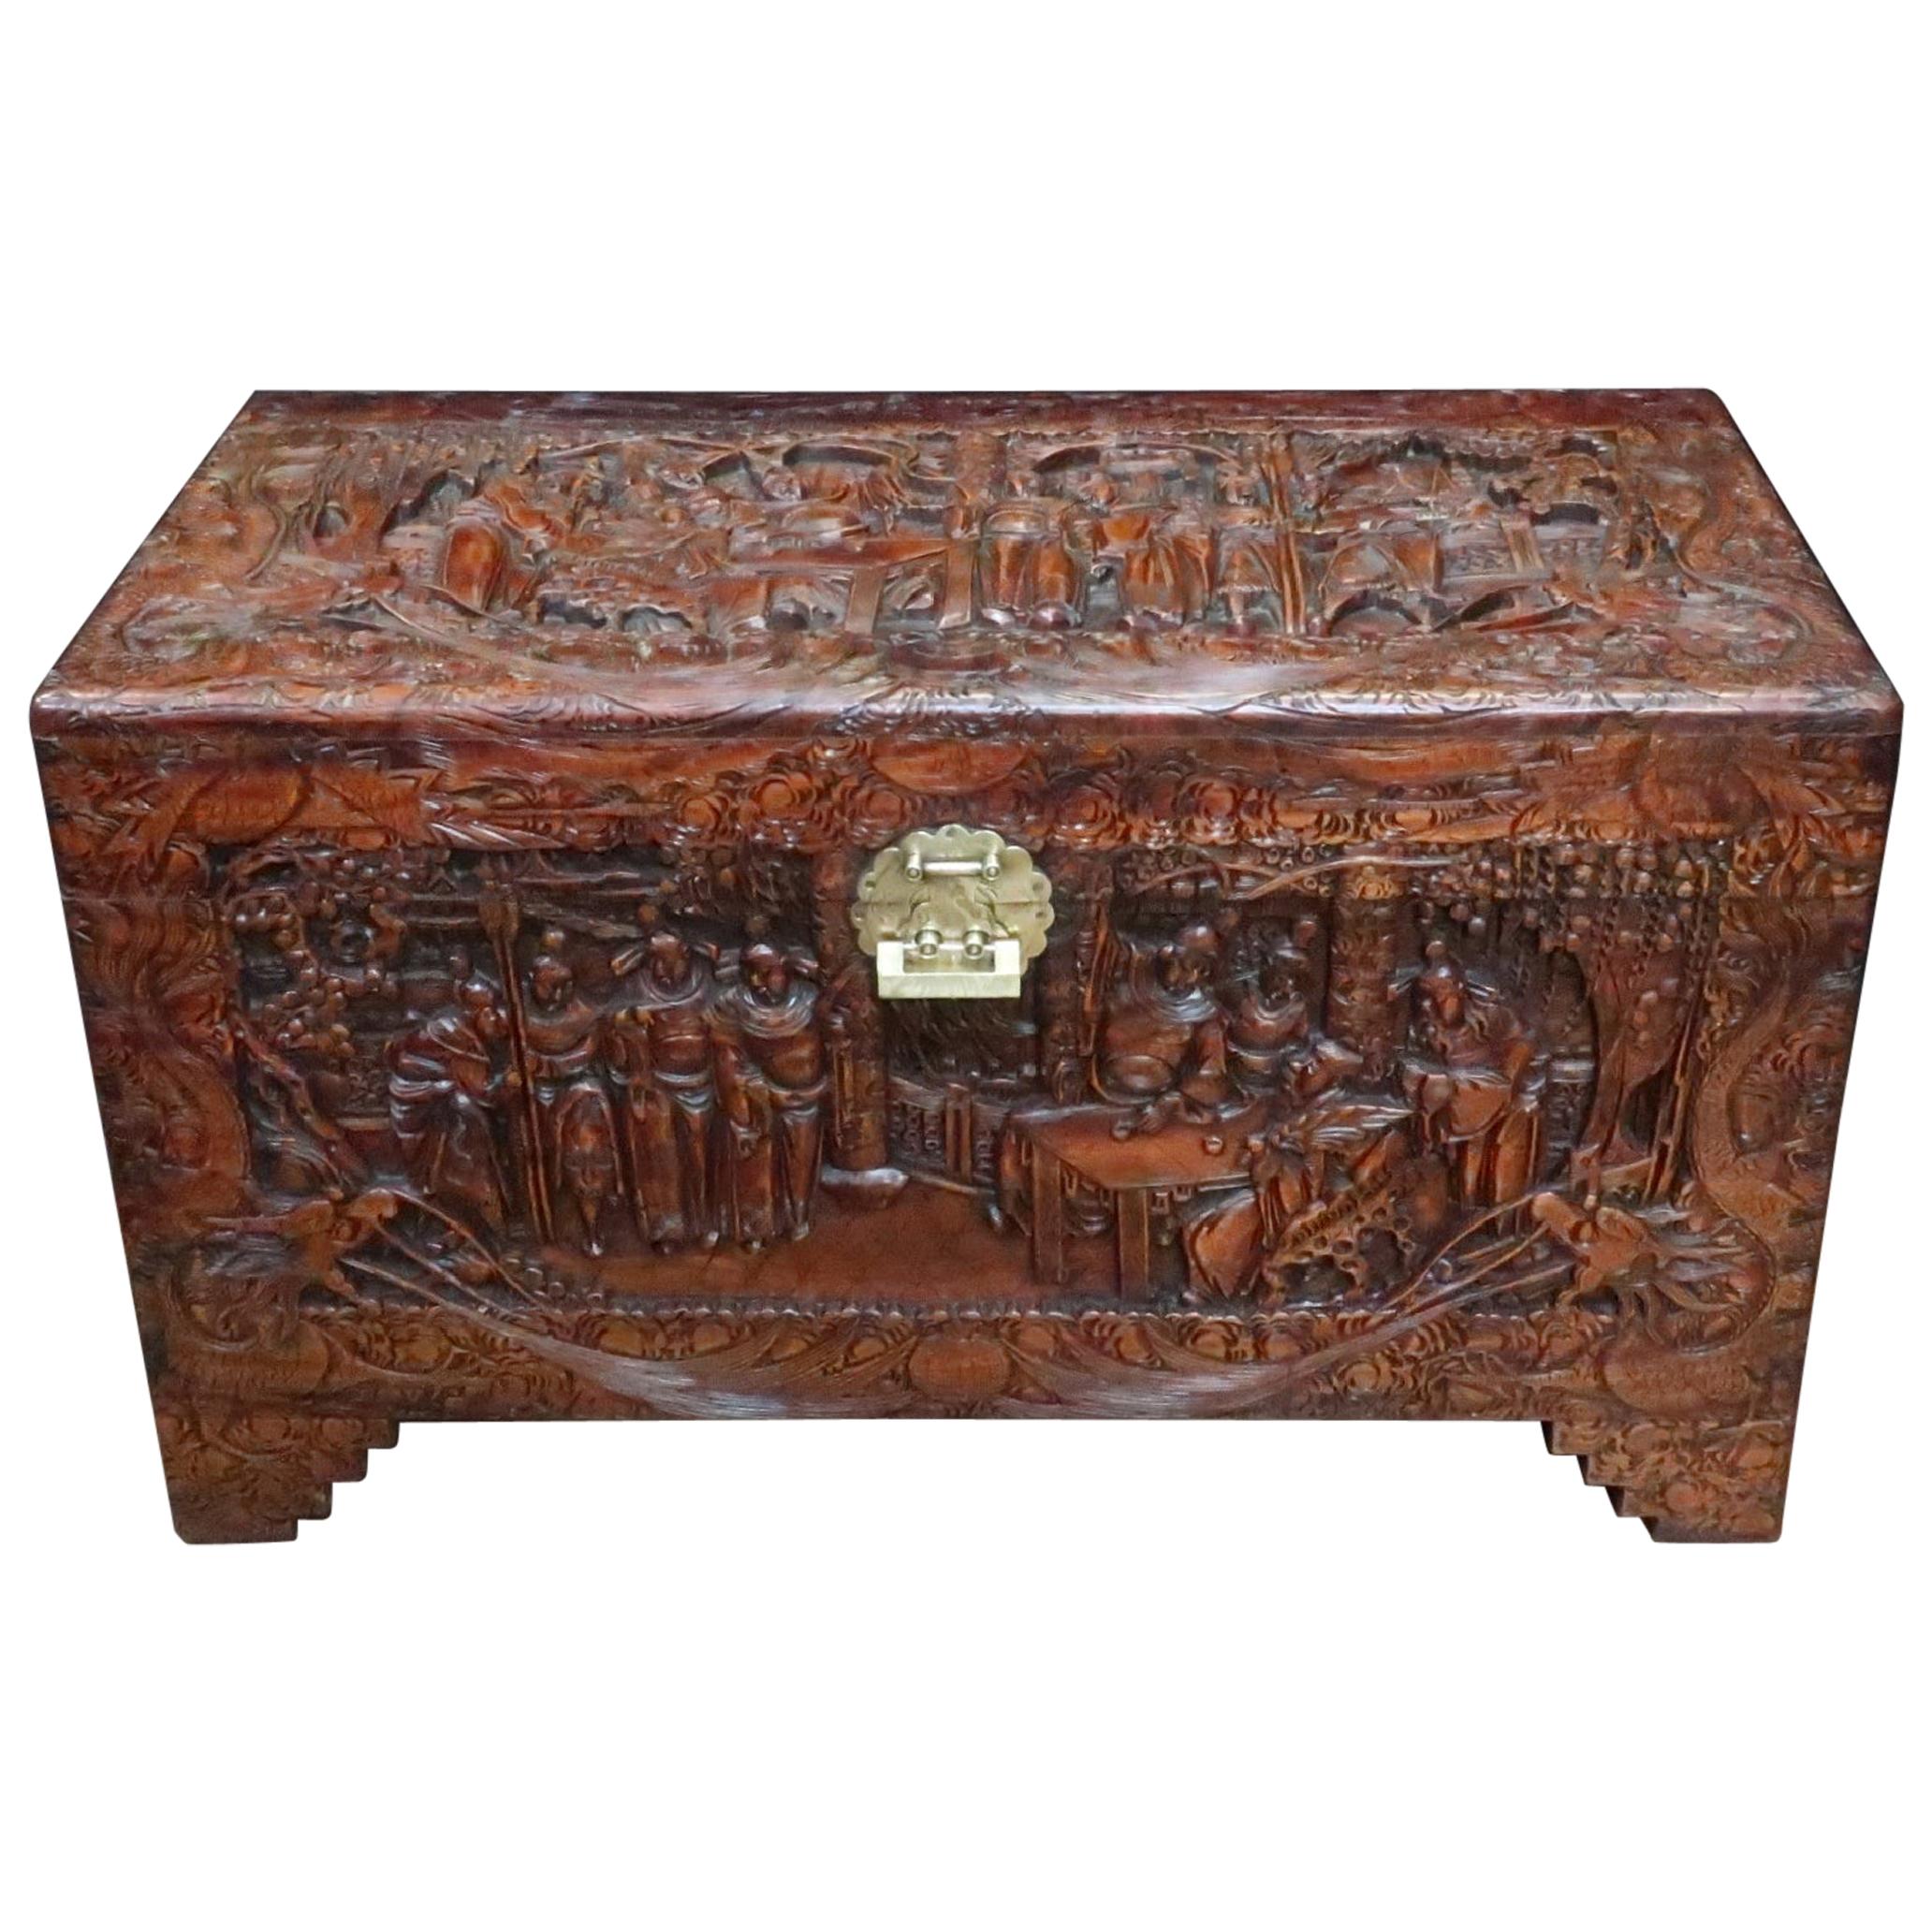 Early 20th Century Oriental Carved Camphor Wood Chest with the Eight Immortals